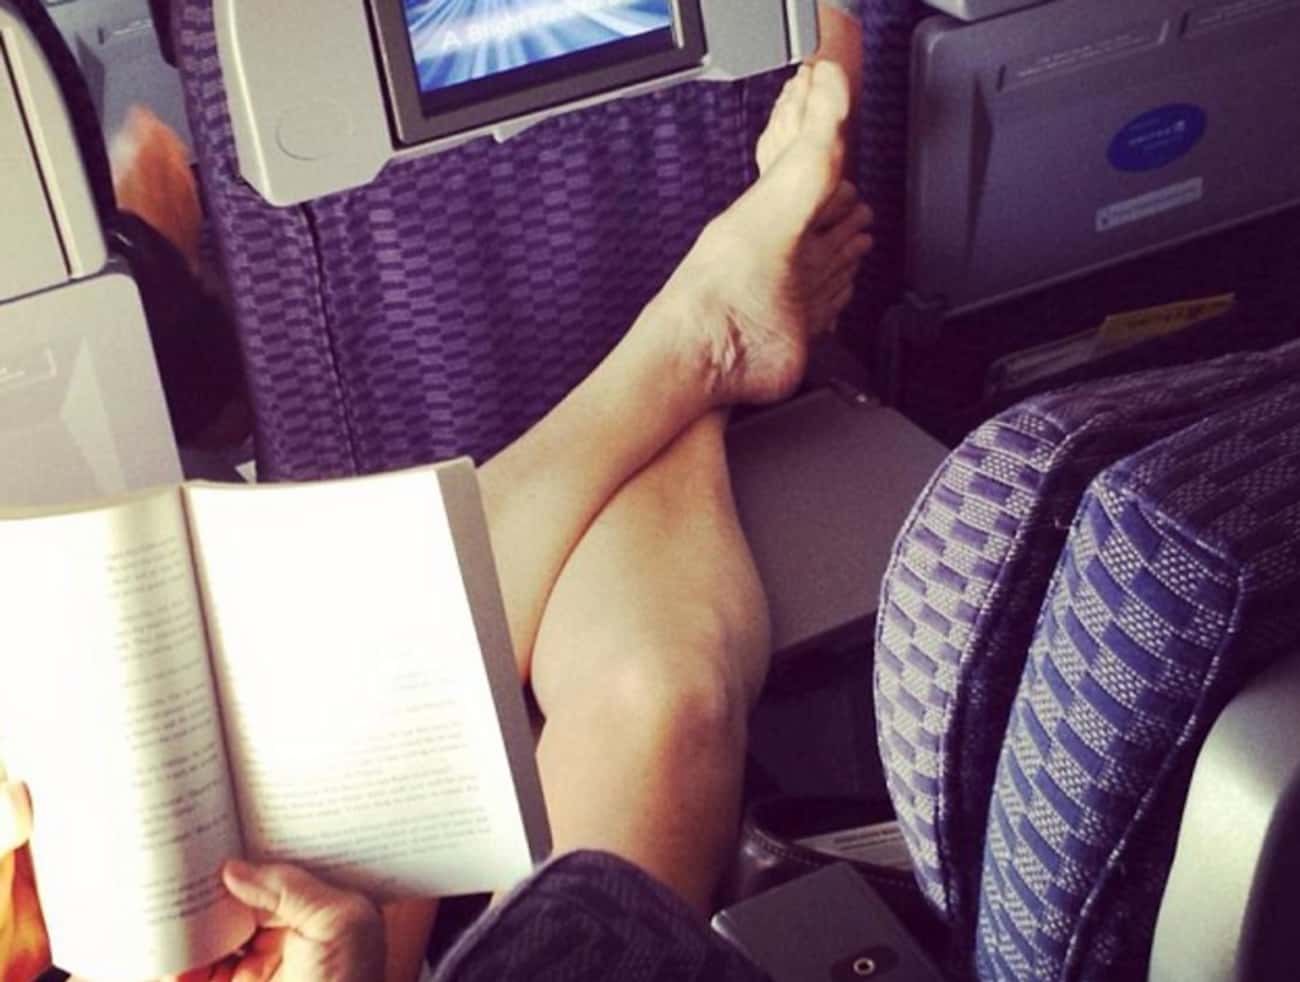 Pretty passenger текст. Passenger shaming. Passenger | anywhere. Pic between the Legs of the Passenger. Confirm shaming.